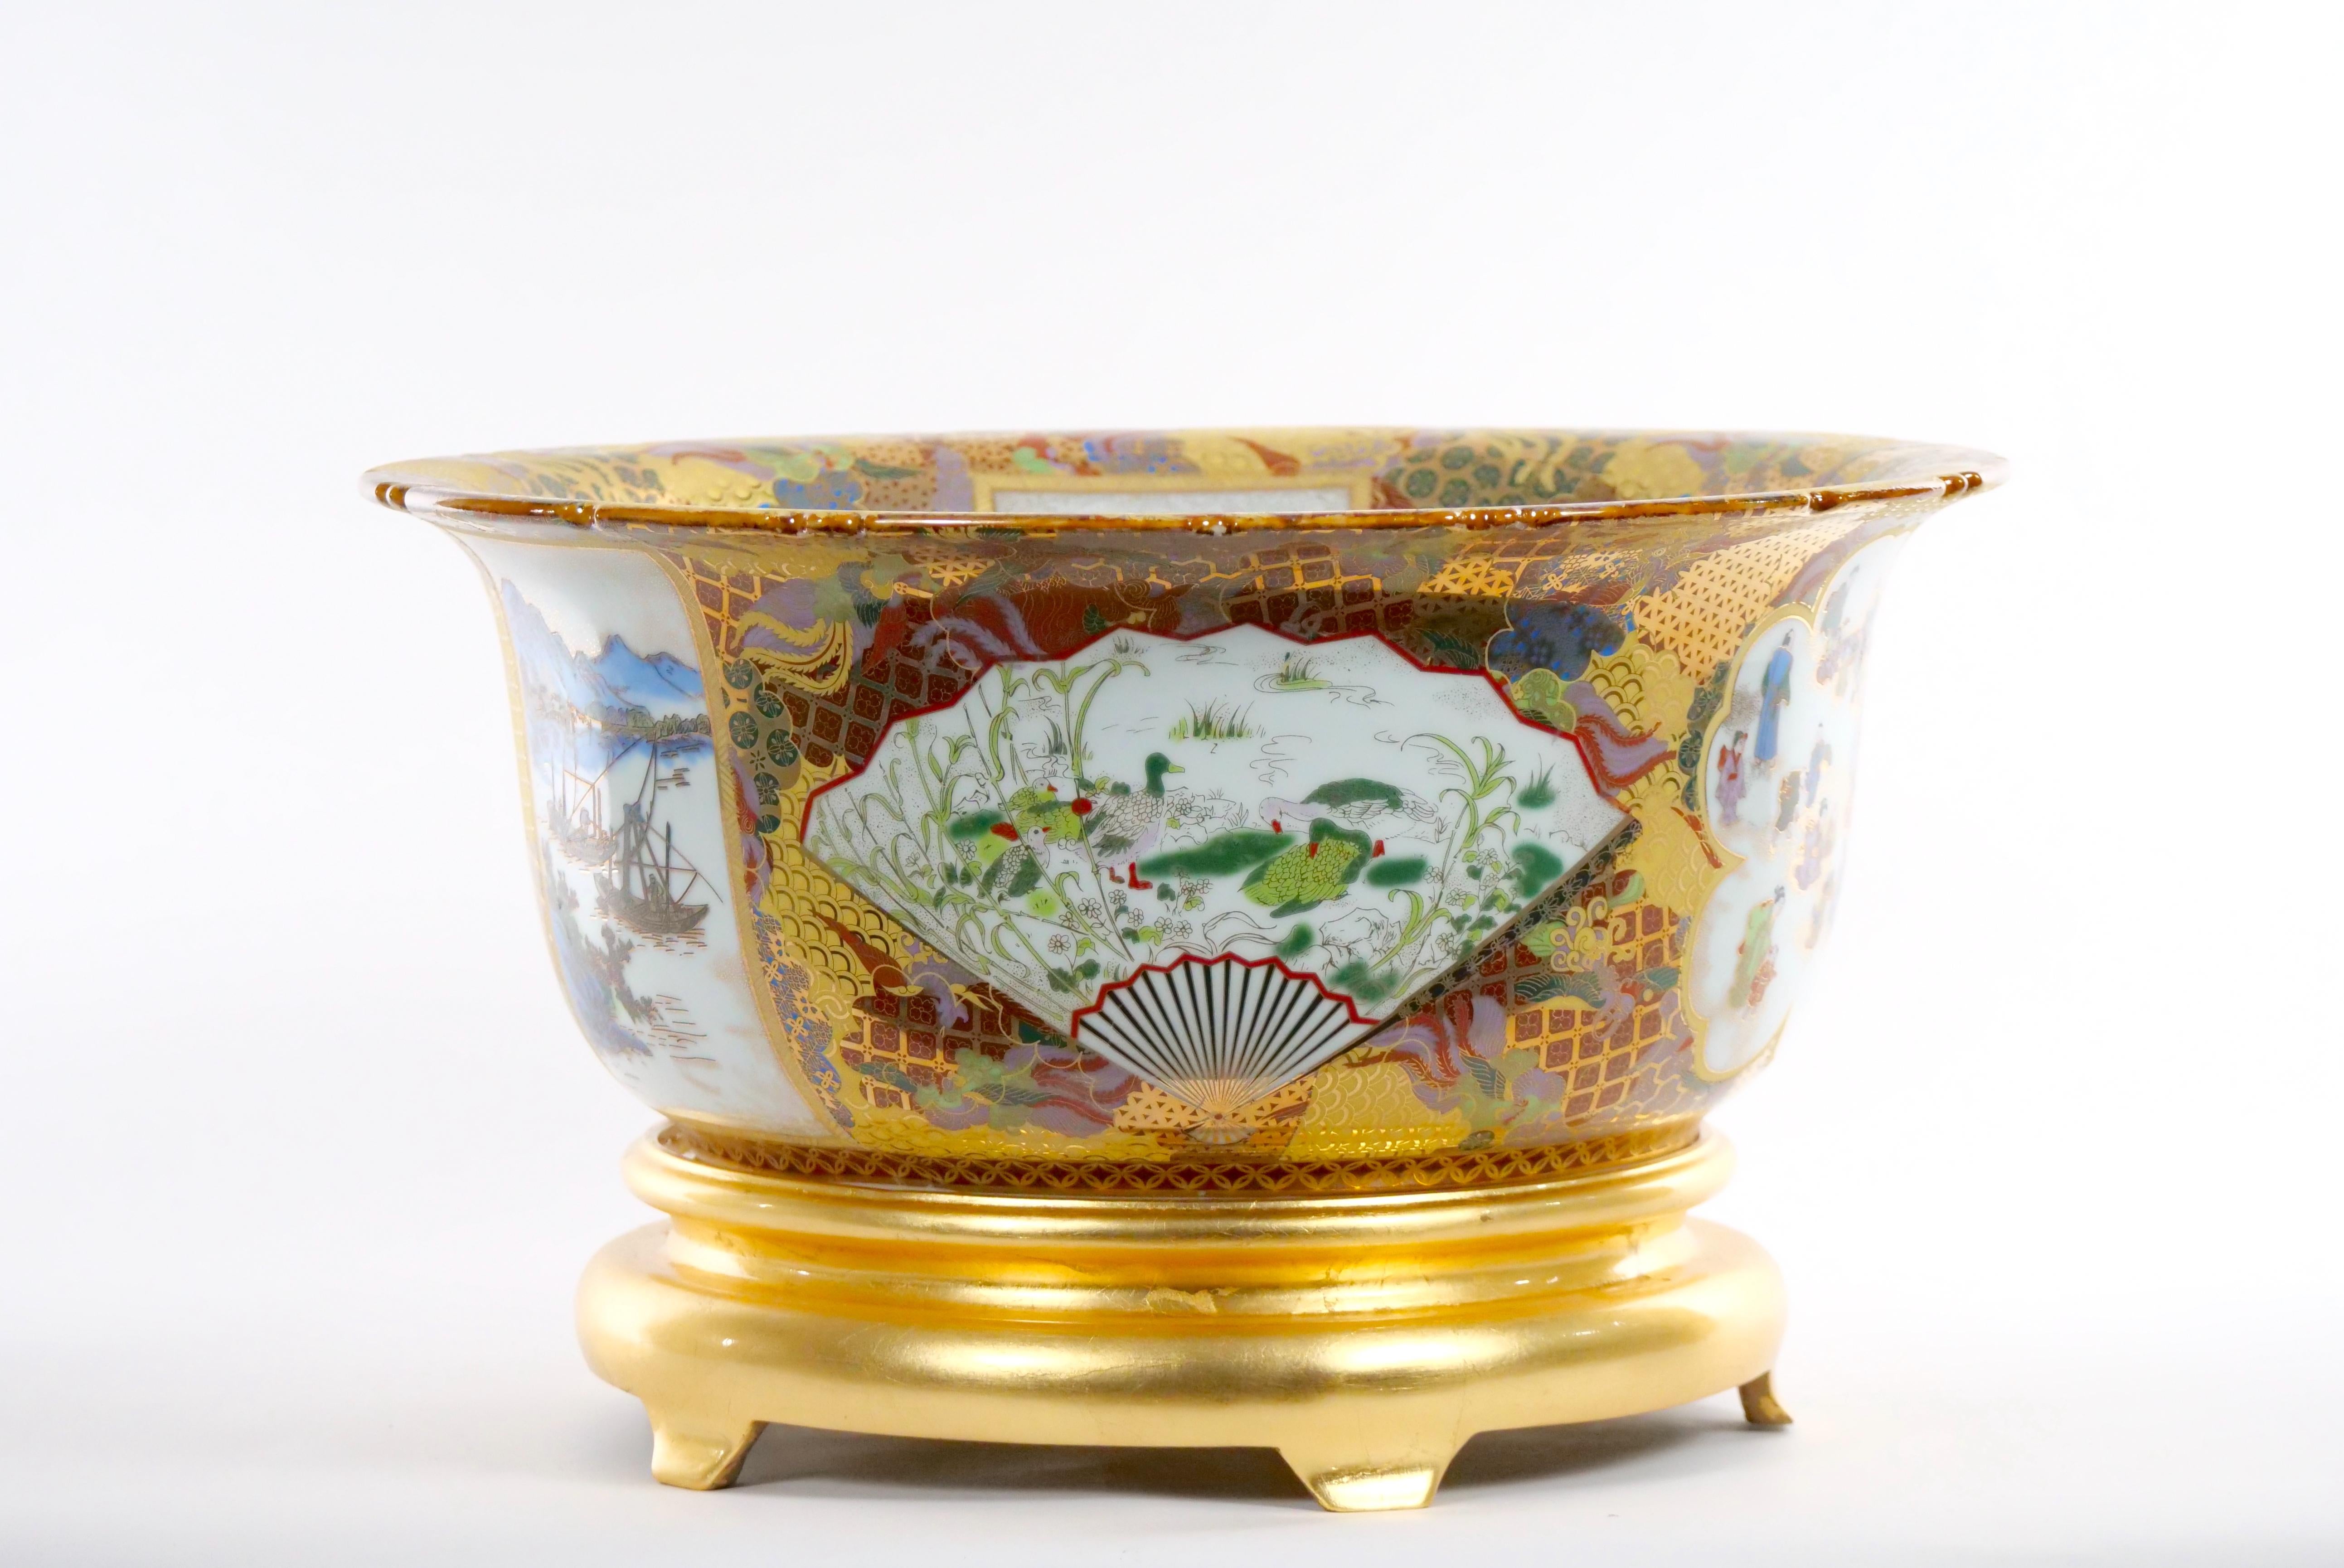 Very large Chinese export porcelain centerpiece bowl (or fishbowl) of the finest quality with giltwood stand. Featuring enameled decorations and cartouches in the shapes of fans, flower heads and rectangles, depicting boats at sea, monkeys nestled